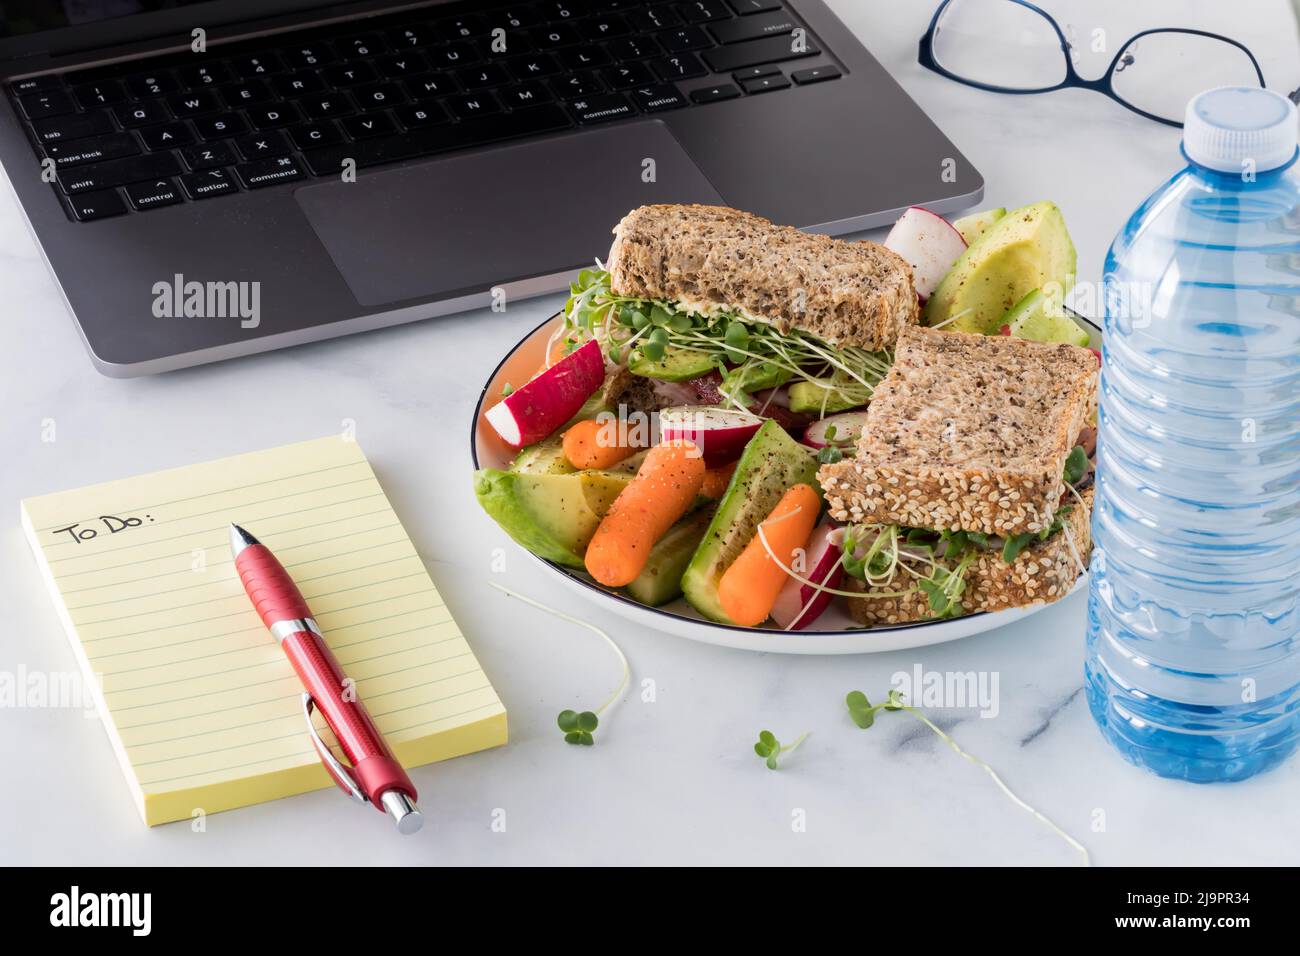 A healthy cape seed bread sandwich served with a side of raw vegetables. Stock Photo